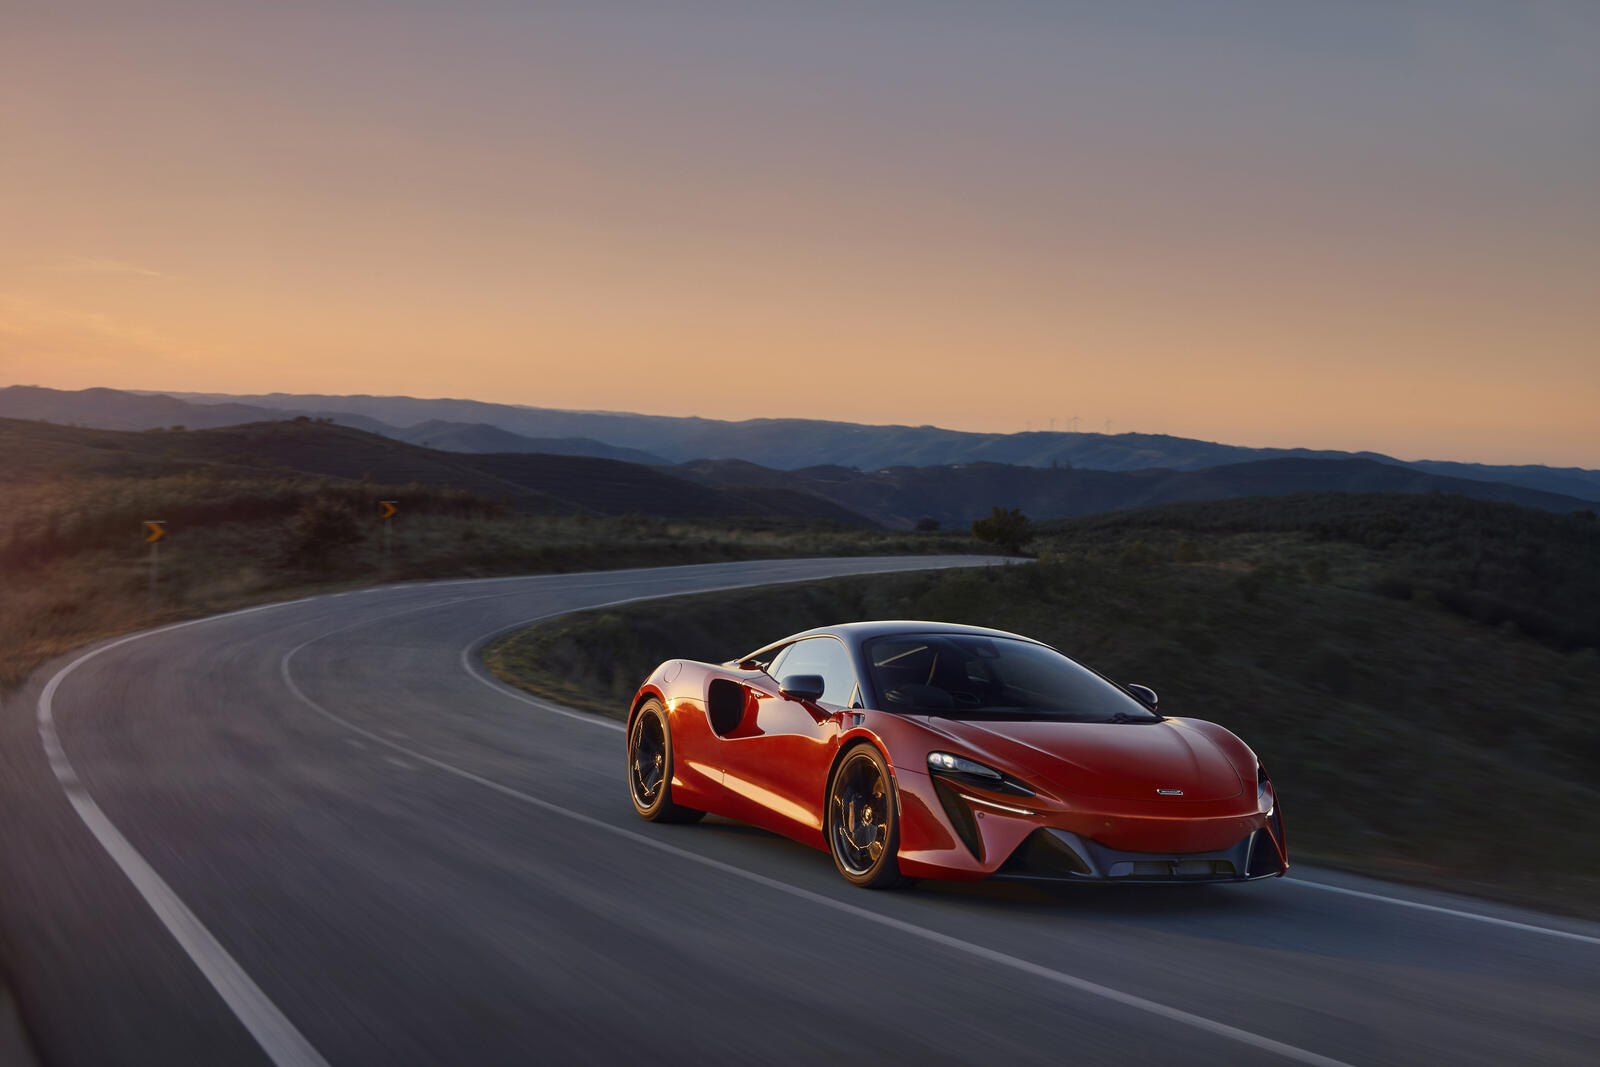 Free photo The Mclaren 2021 in red drives at high speed